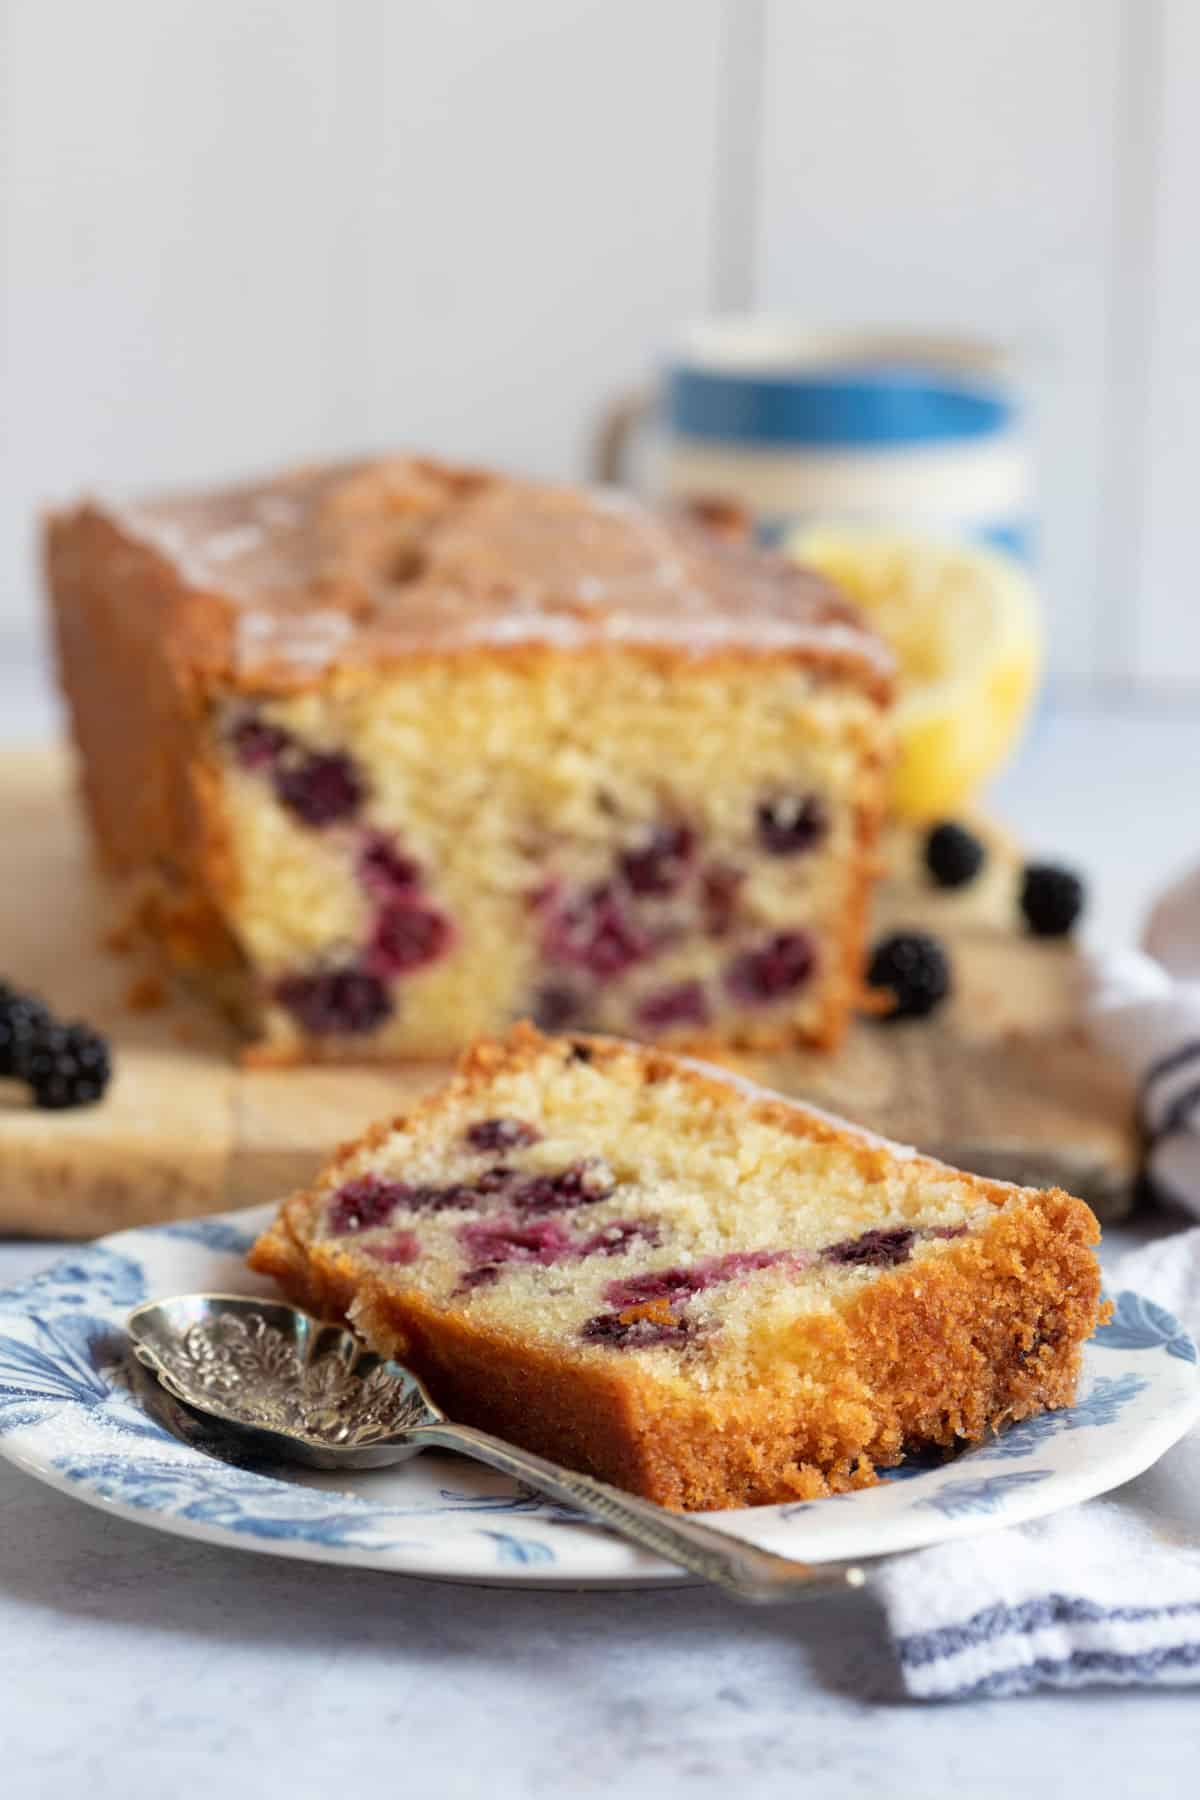 Blackberry and lemon loaf cake with a slice cut off the end.